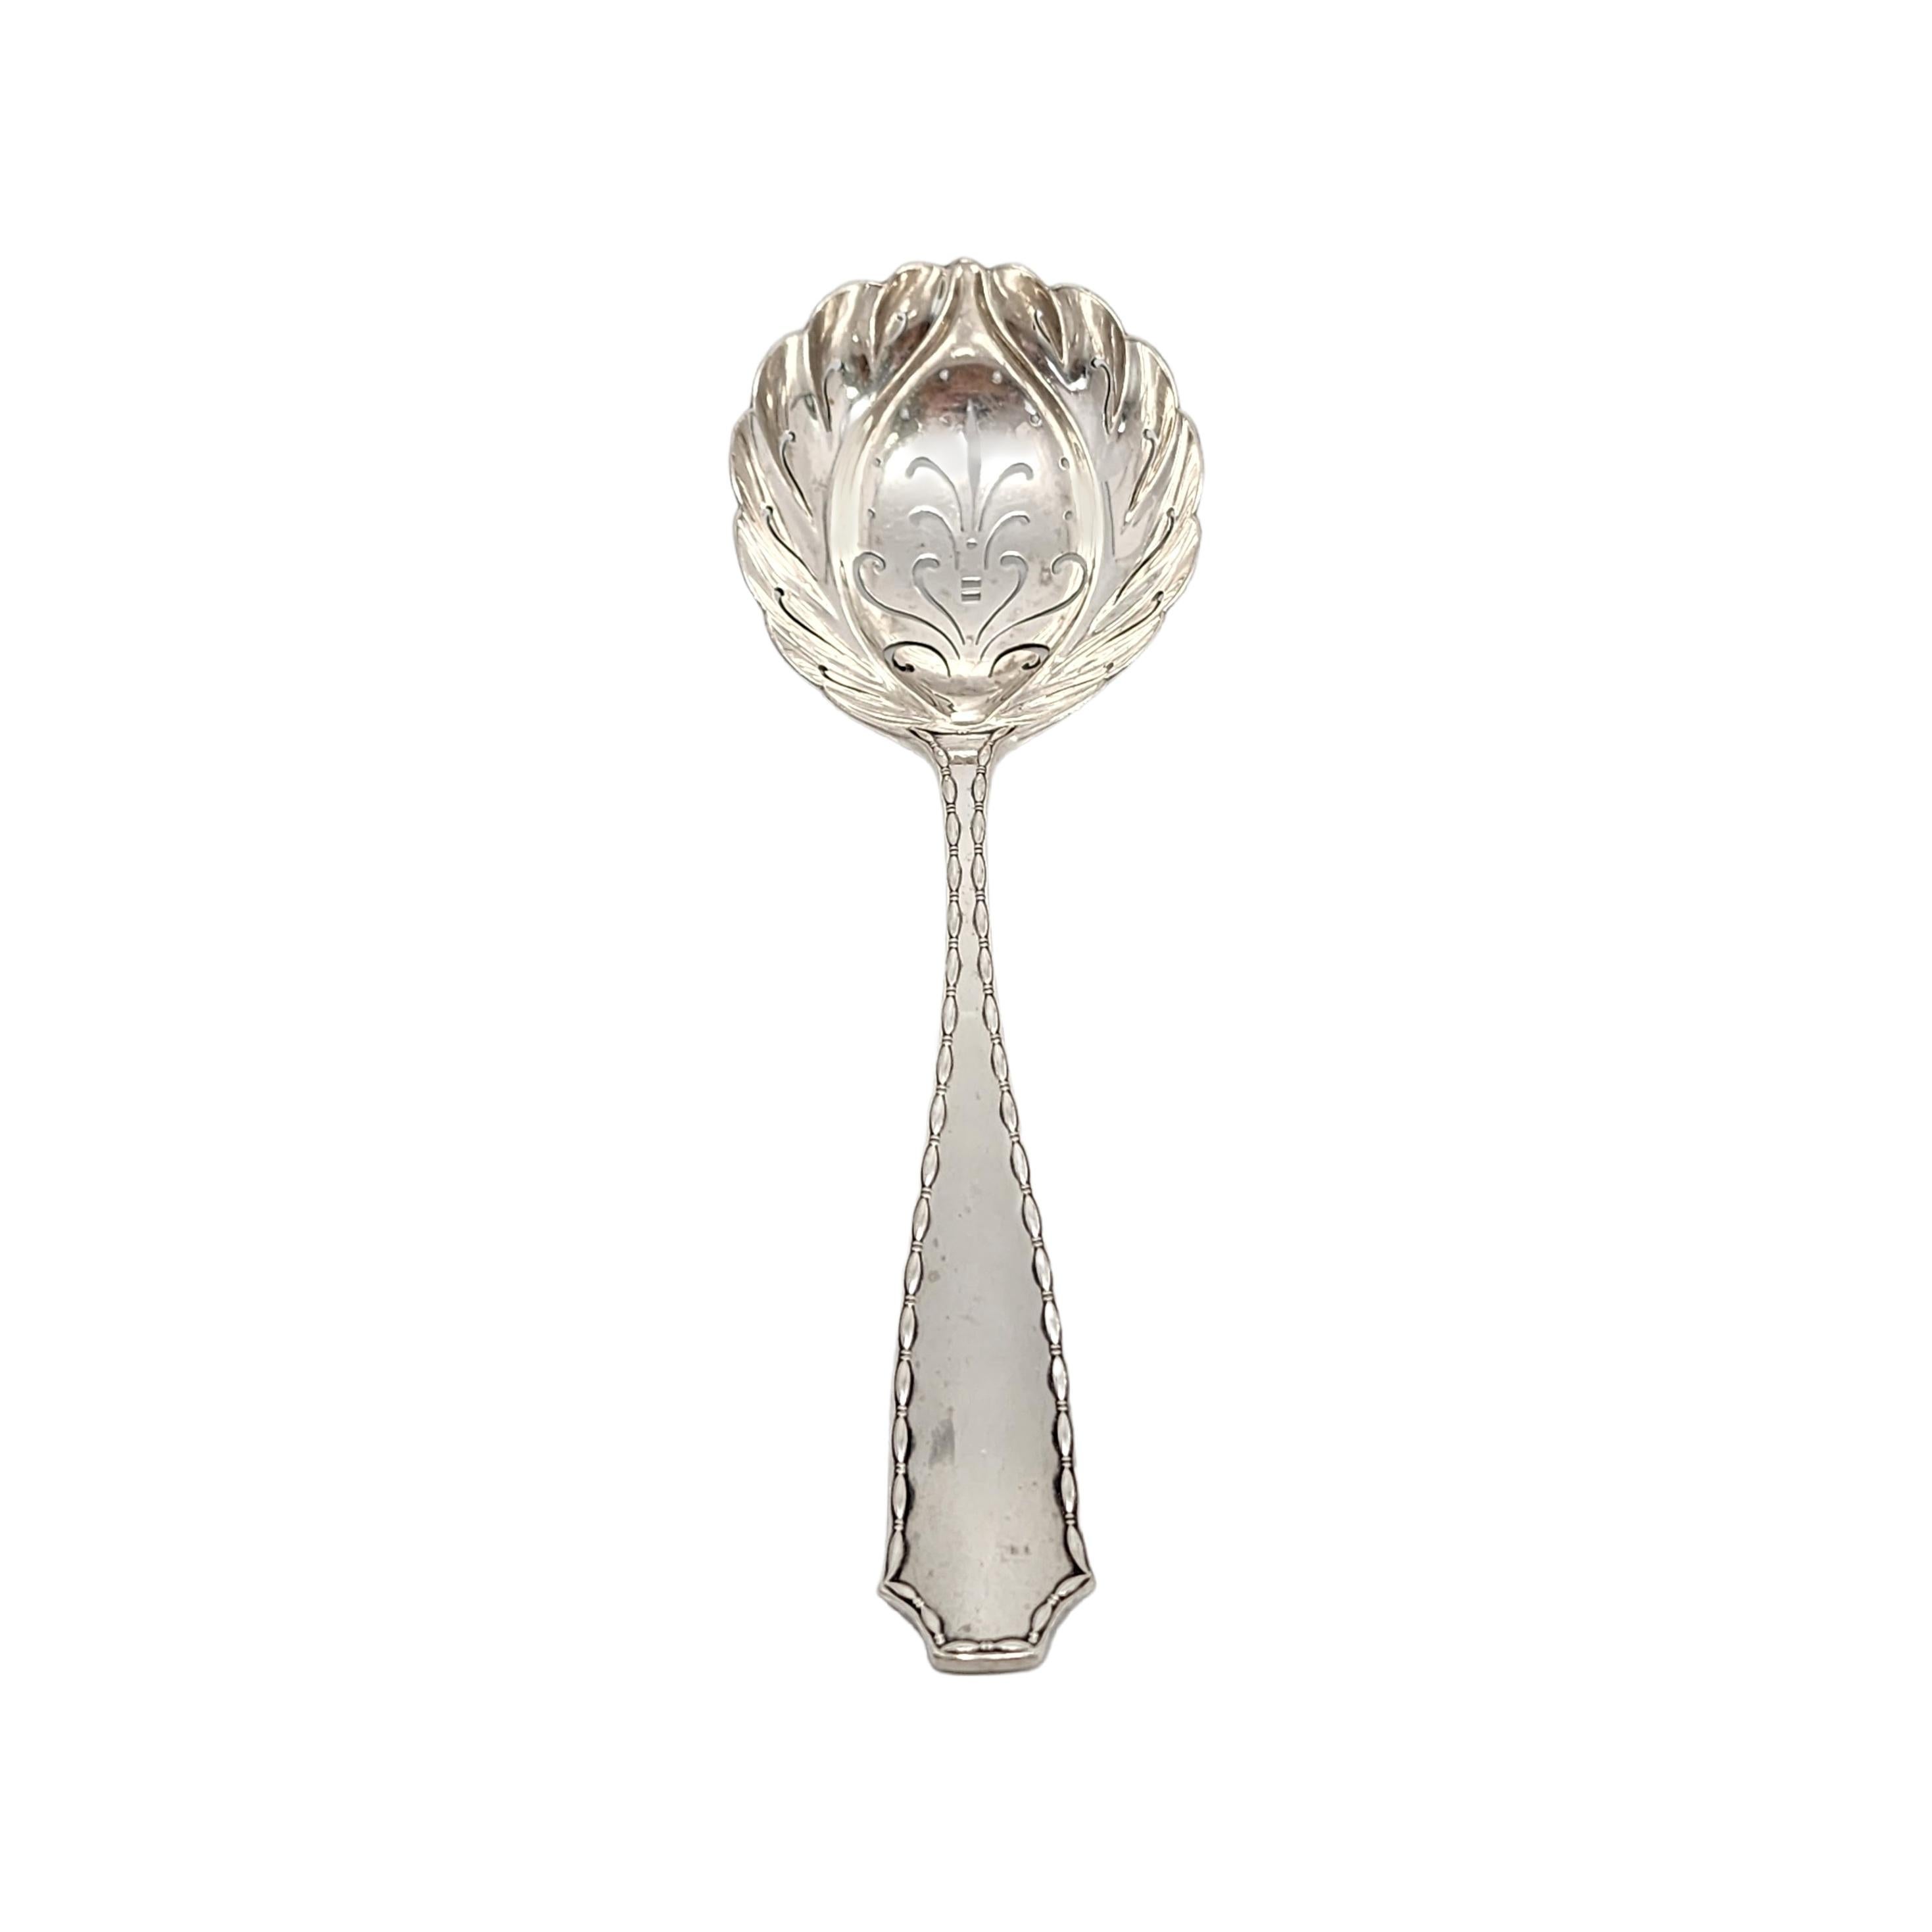 Tiffany & Co Sterling Silver Marquise Sugar Sifter Scallop Bowl 2